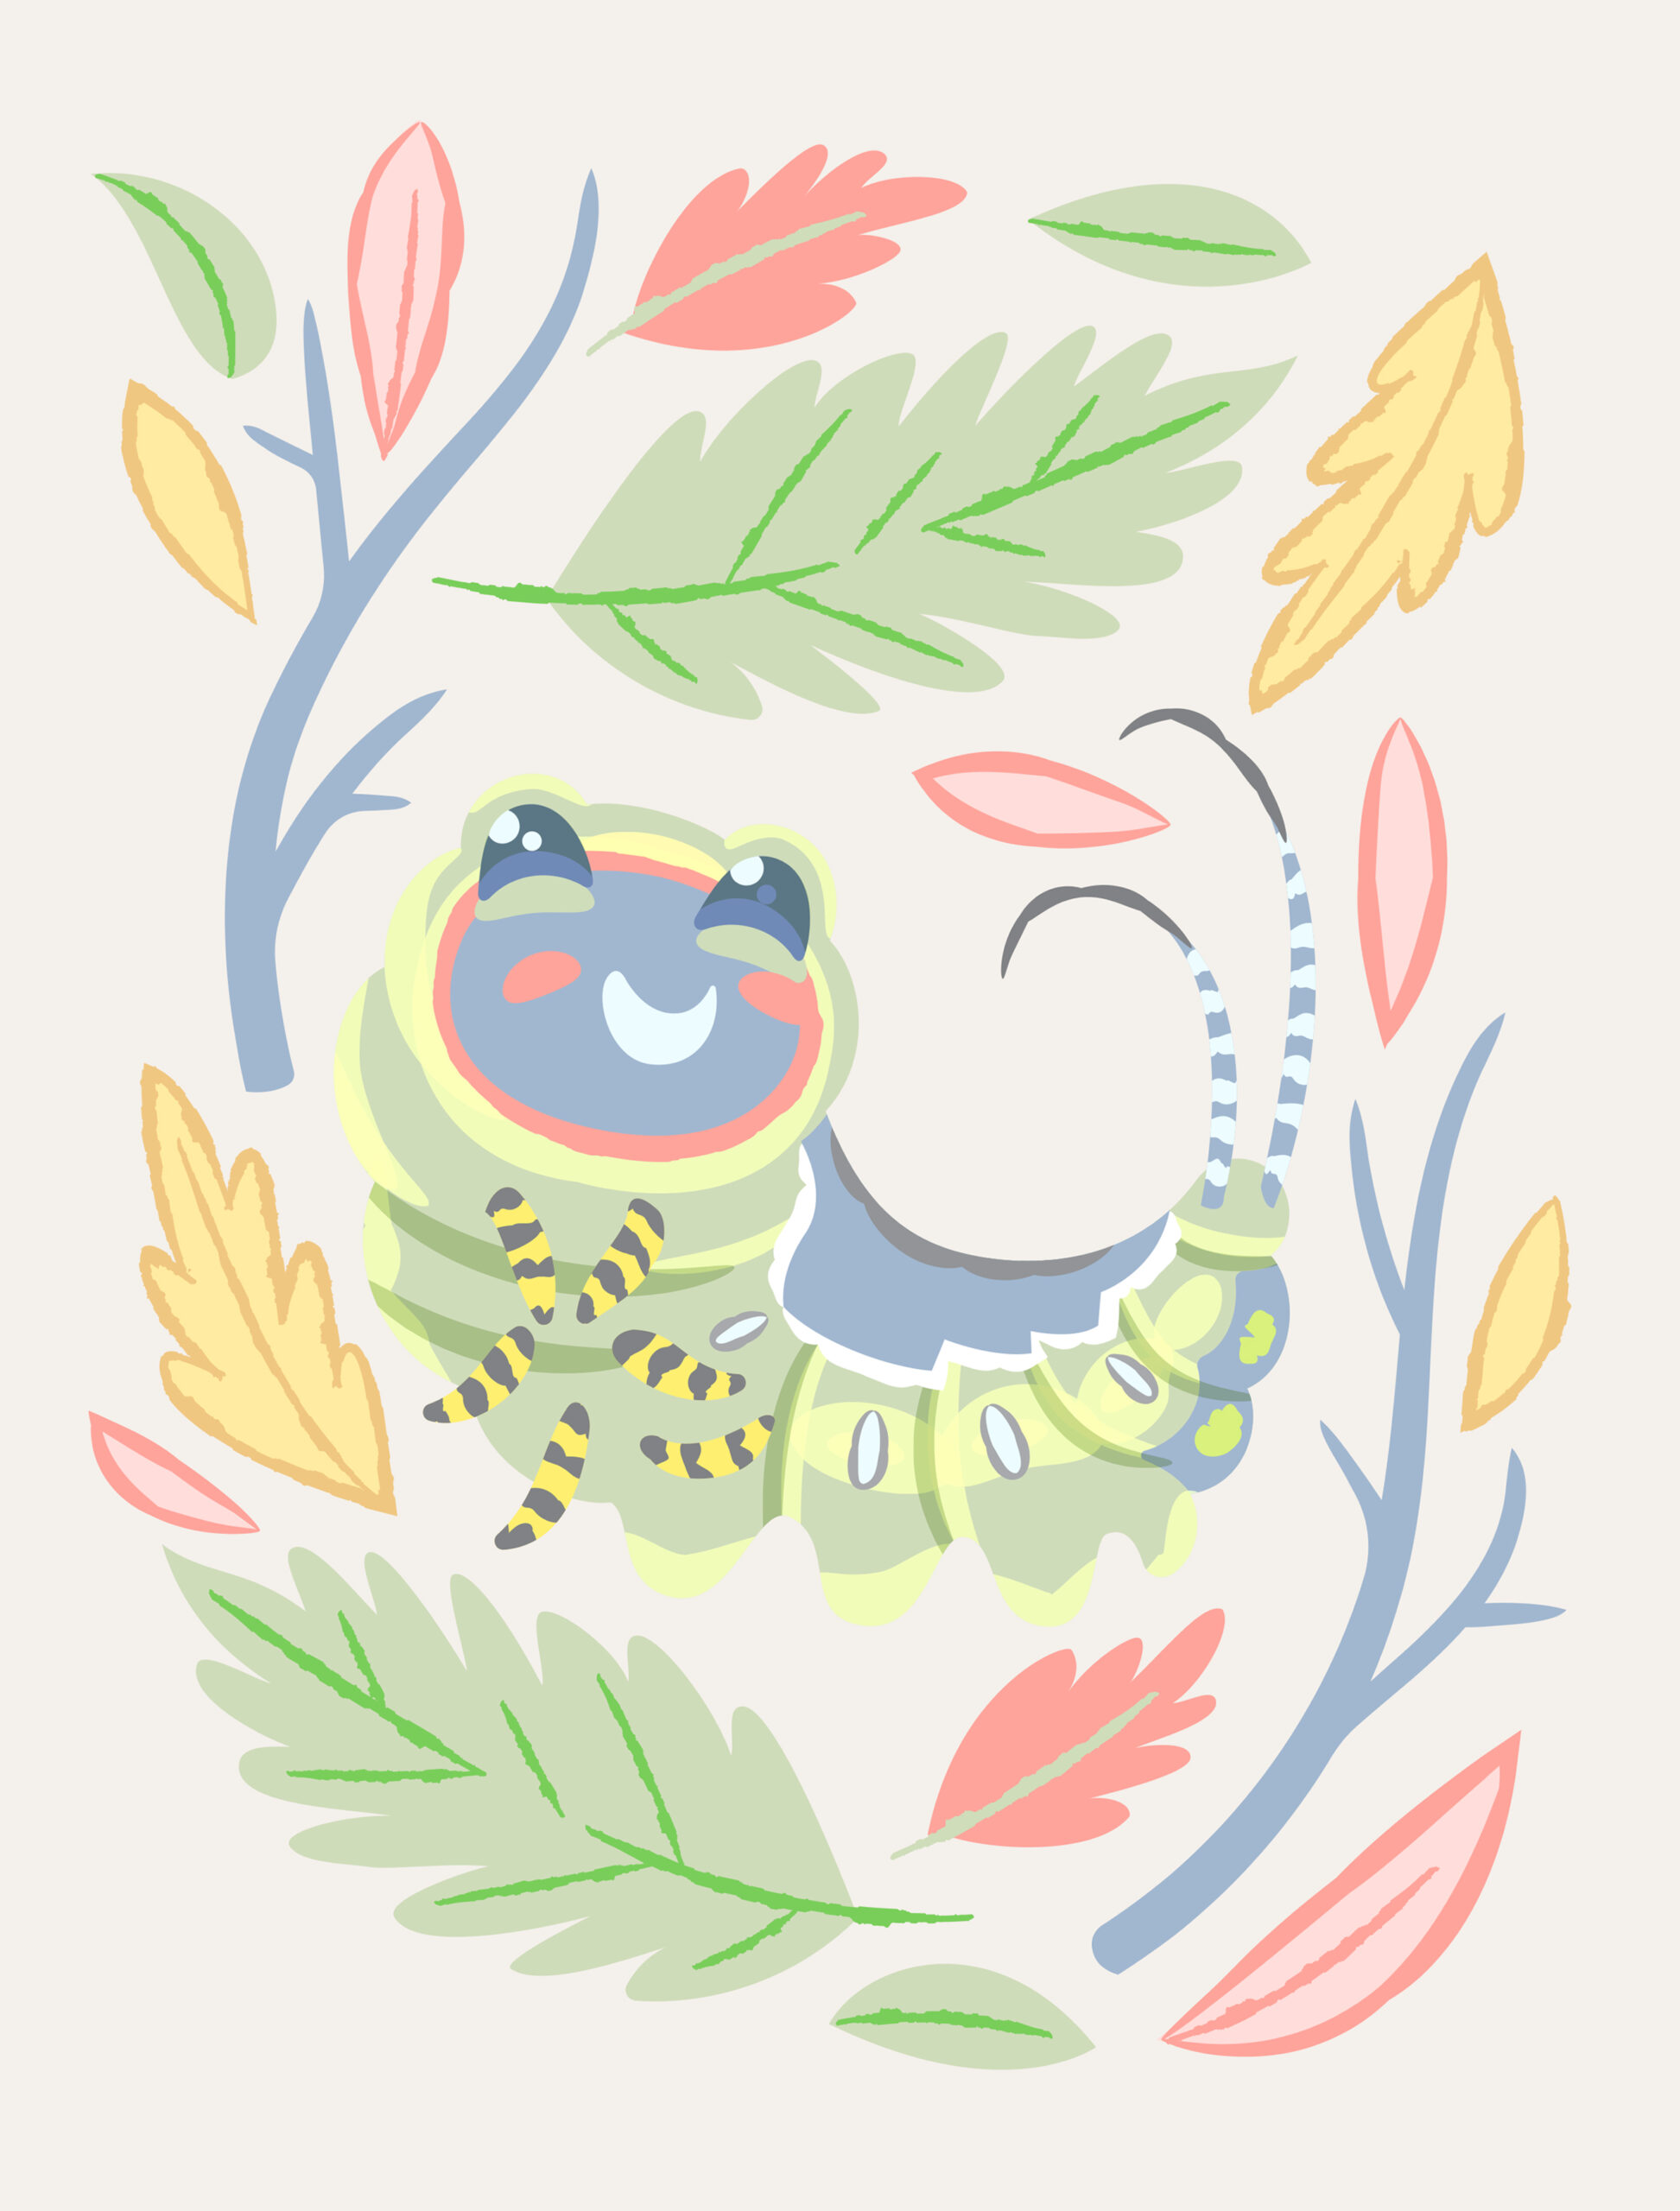 Caterpillar character art and foliage elements in design using pastel color palette.